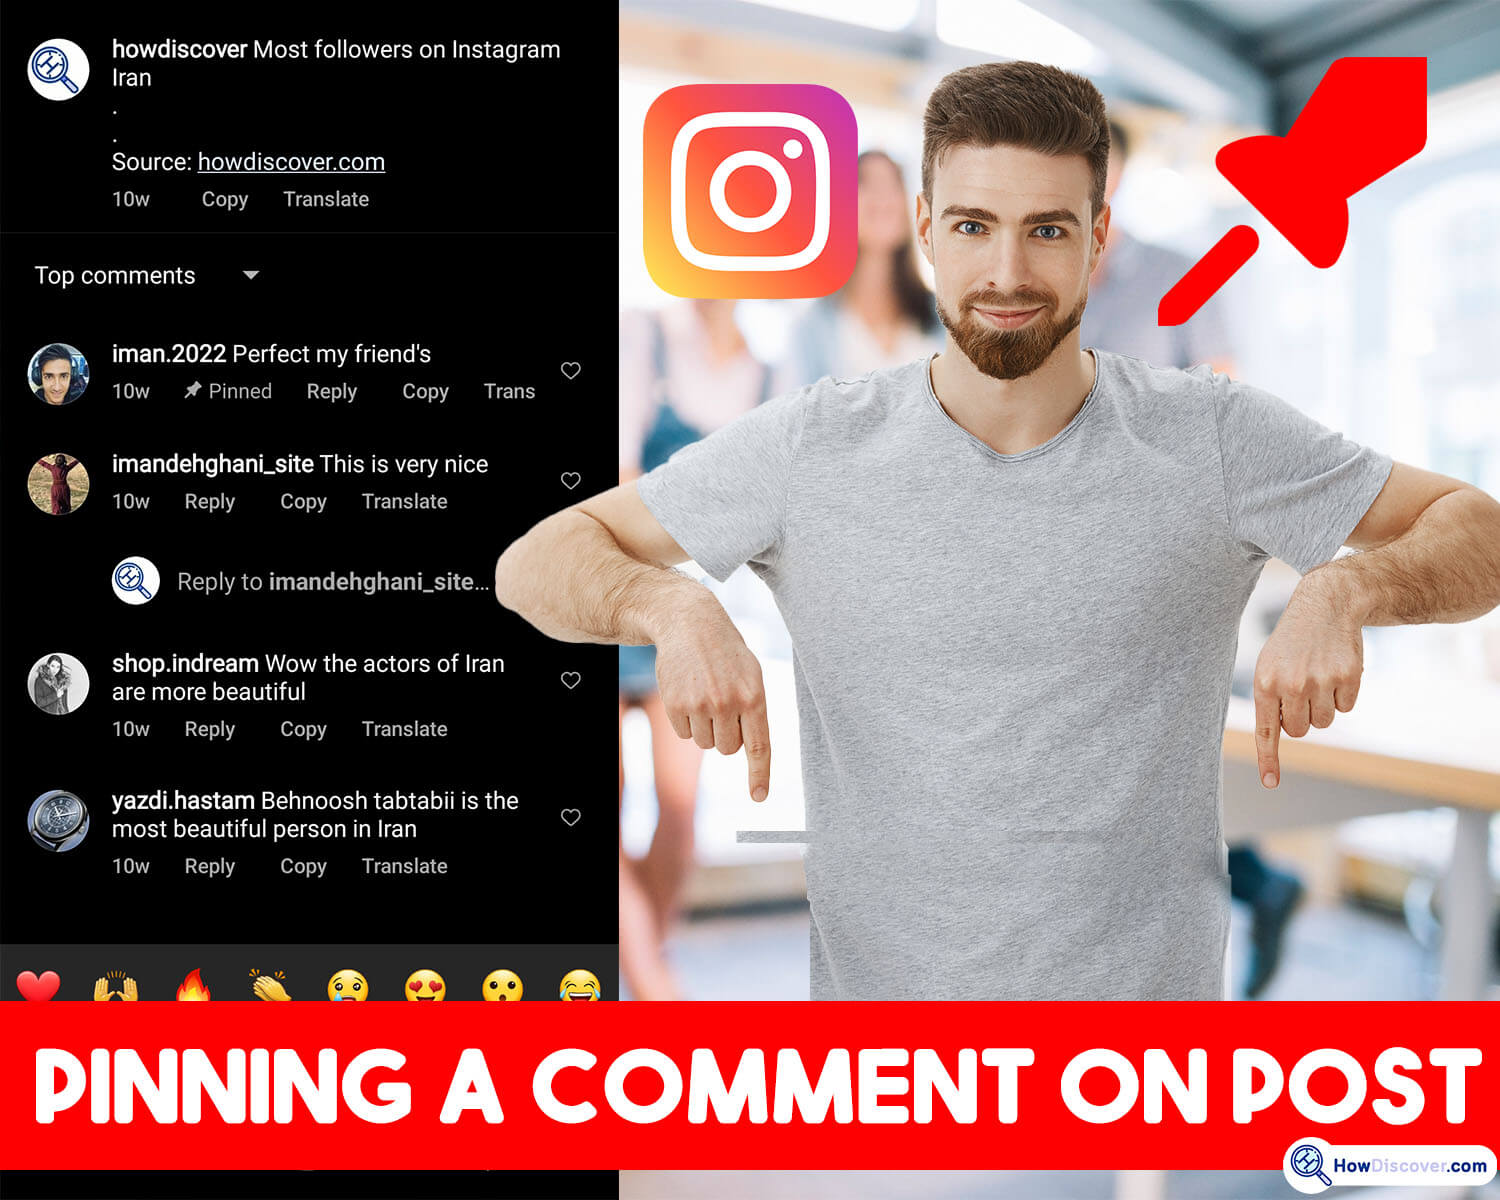 How To Pin A Comment On Instagram - Pinning & unpinning a comment on an Instagram post